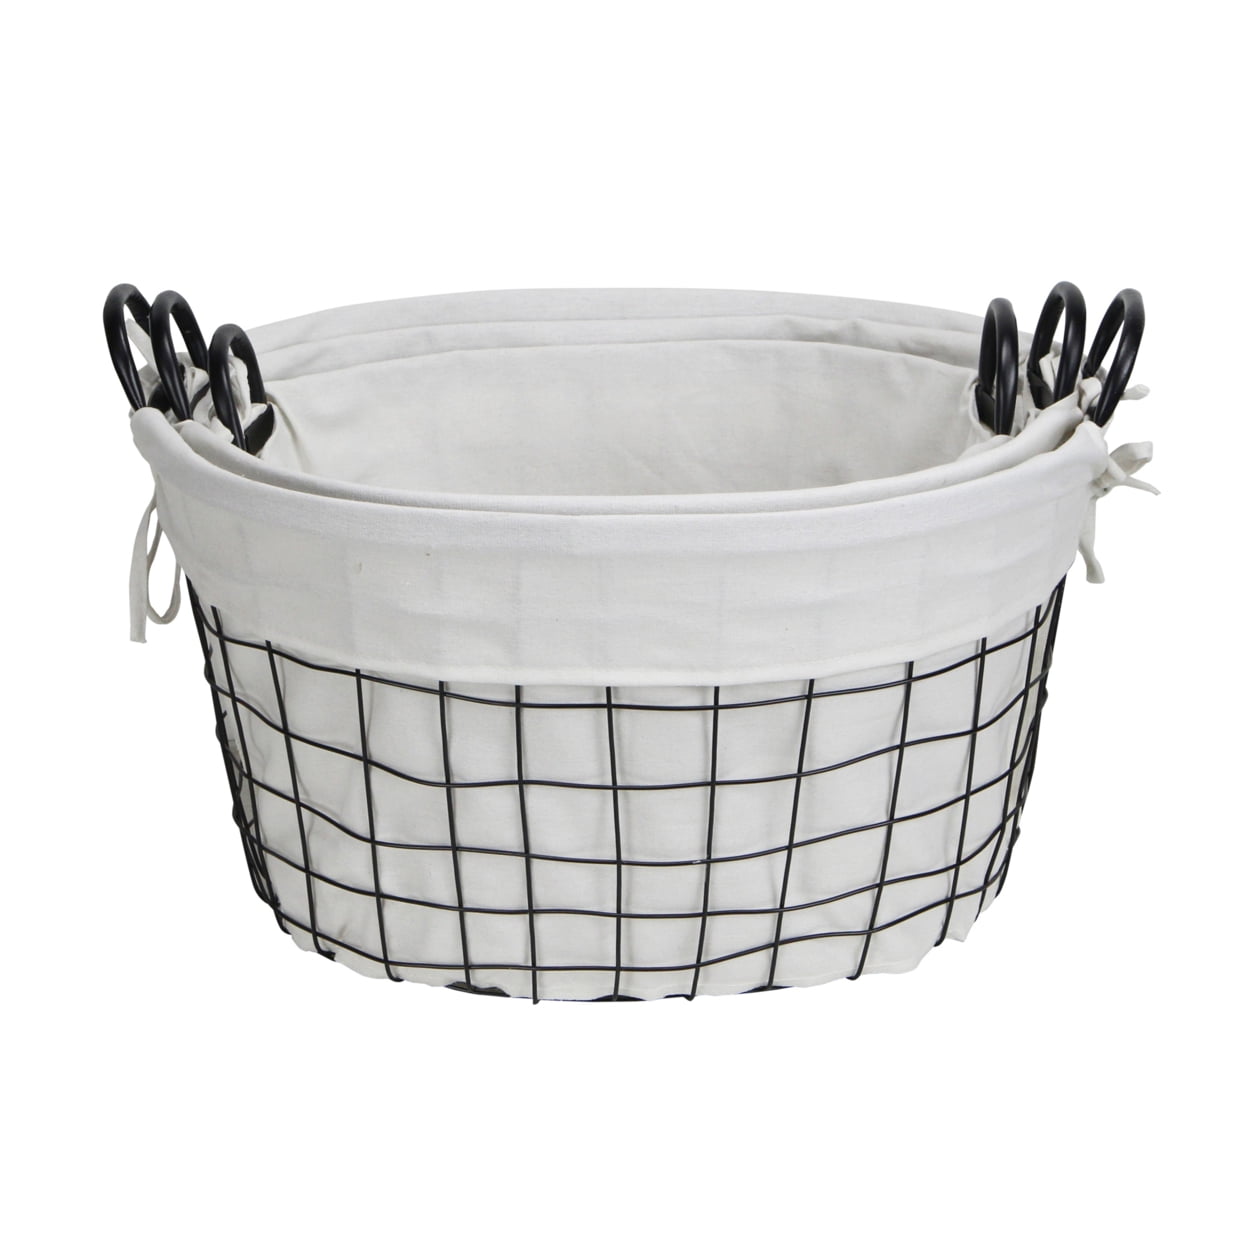 Cheung 16s001-3 Lined Metal Wire Oval Basket With Handle, Set Of 3